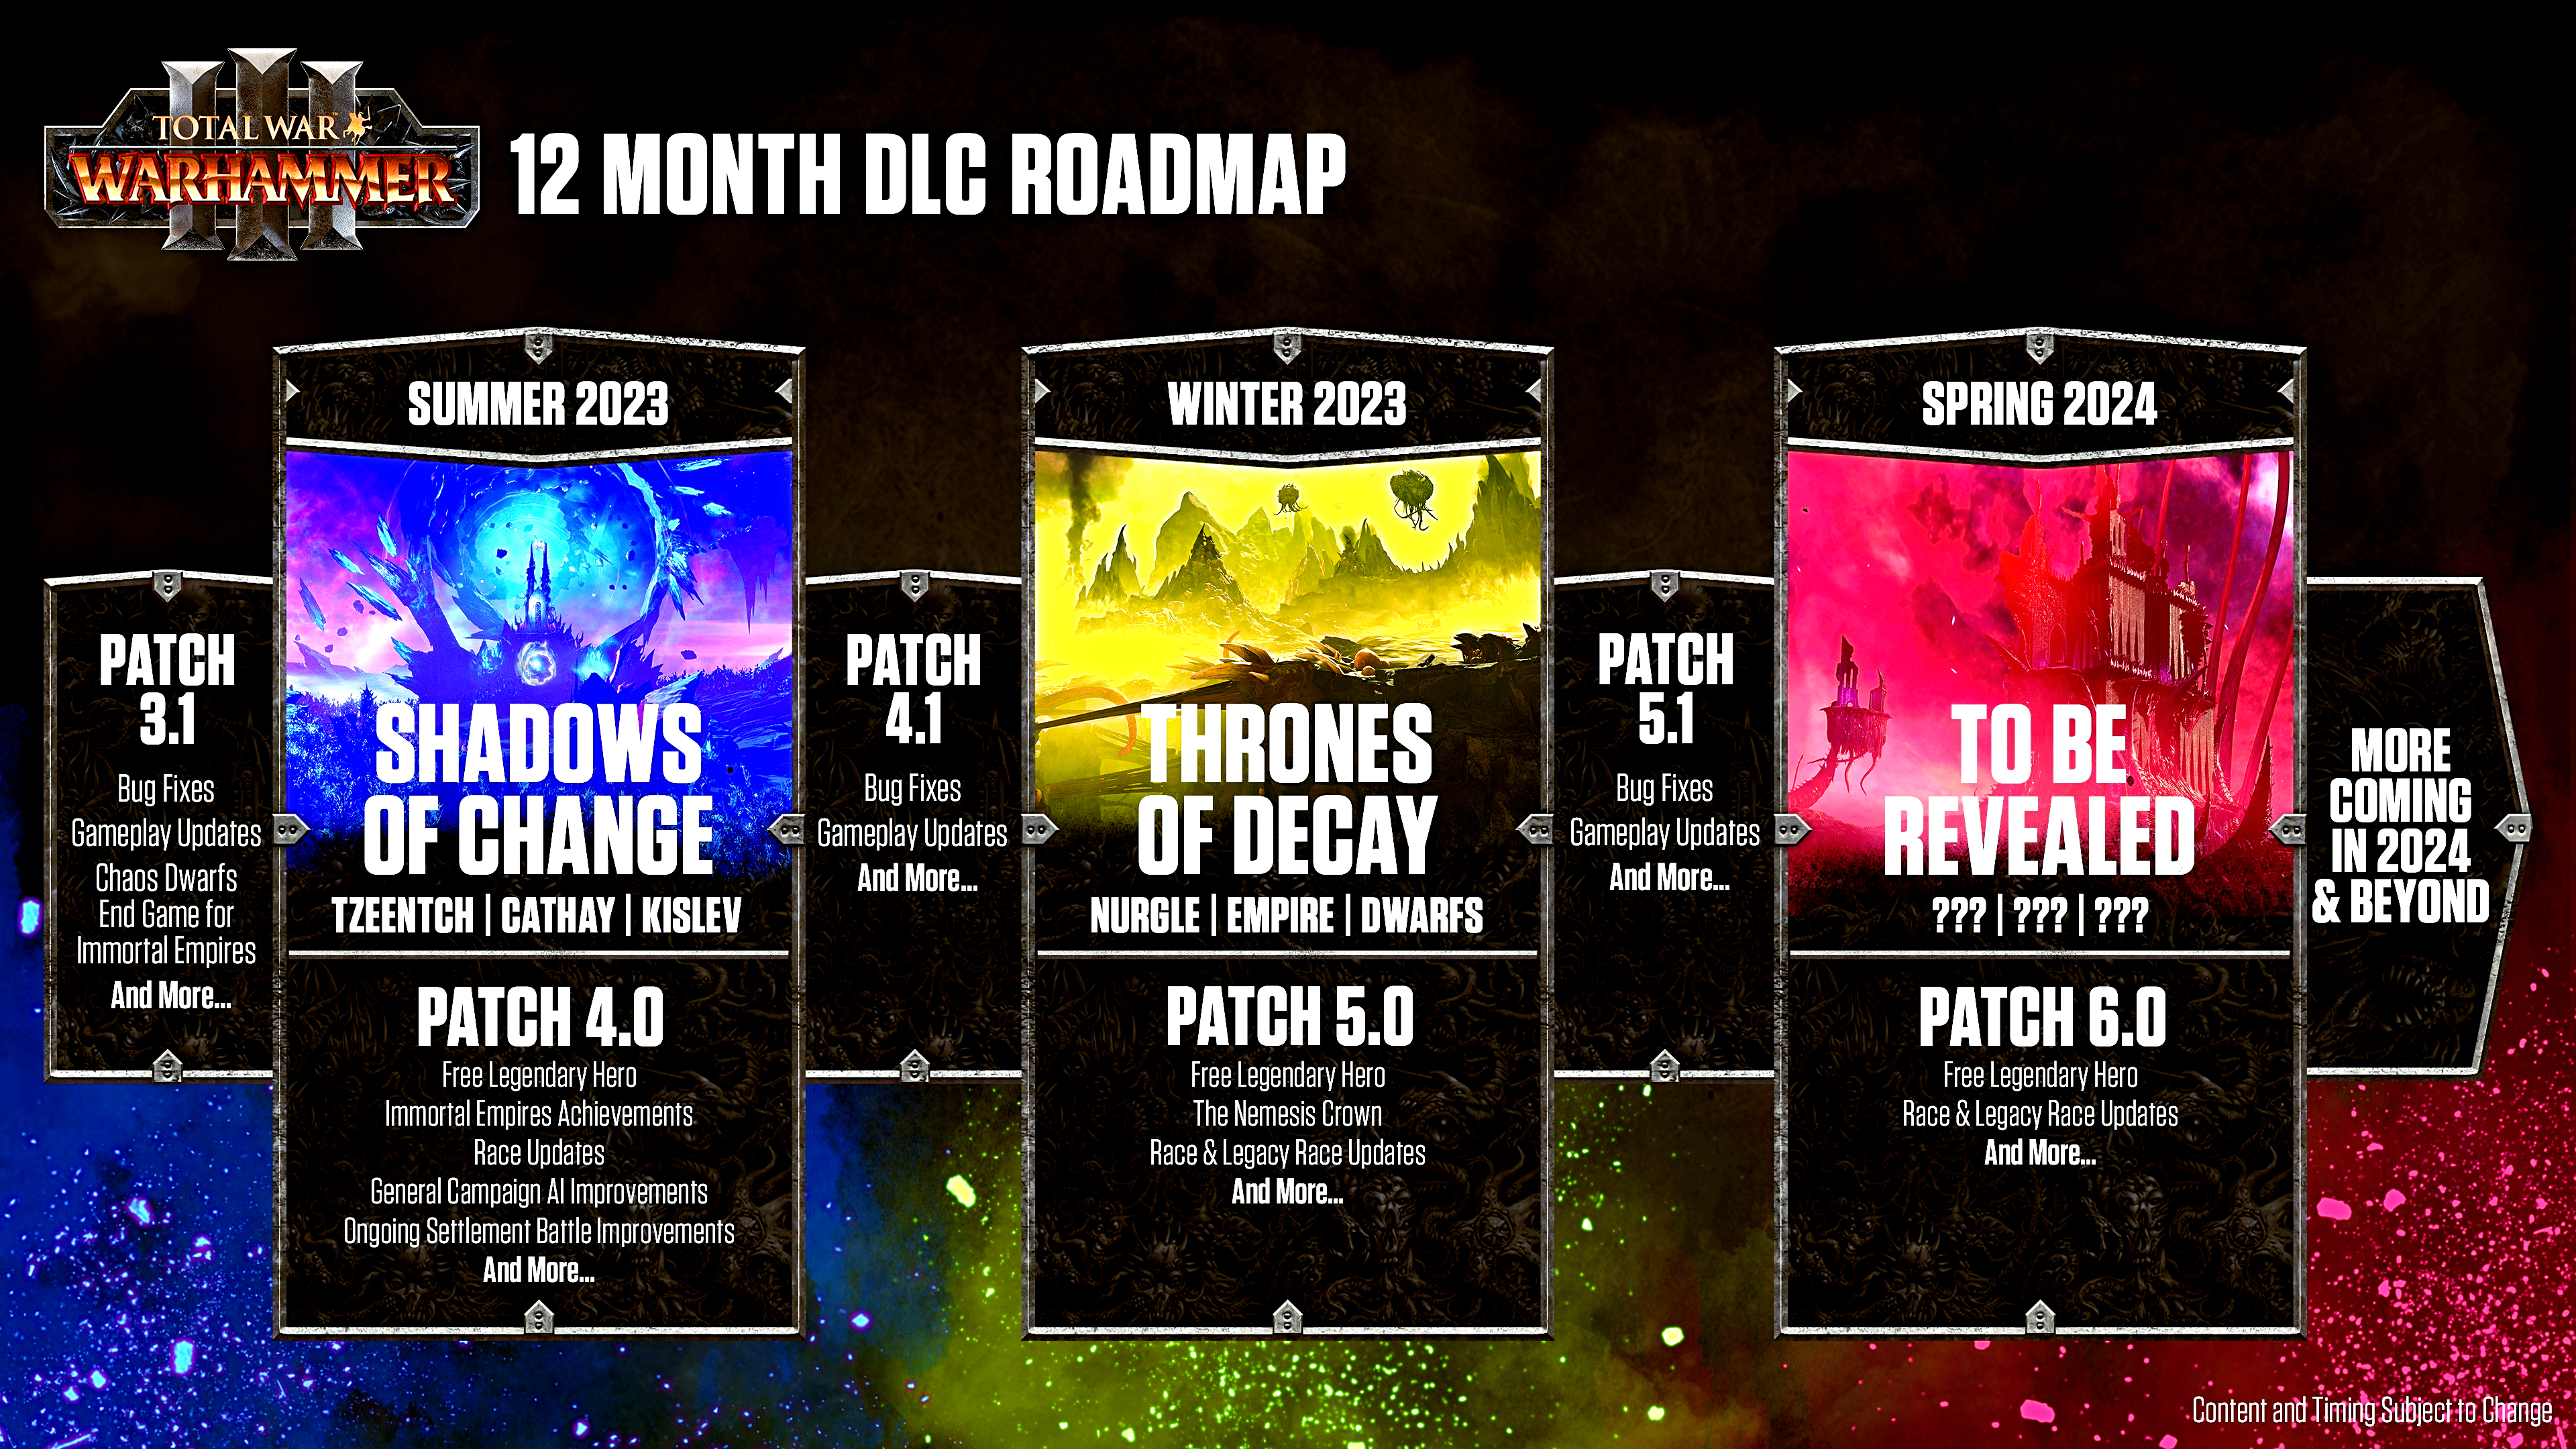 (The roadmap reveals what we can expect over the next twelve months.)